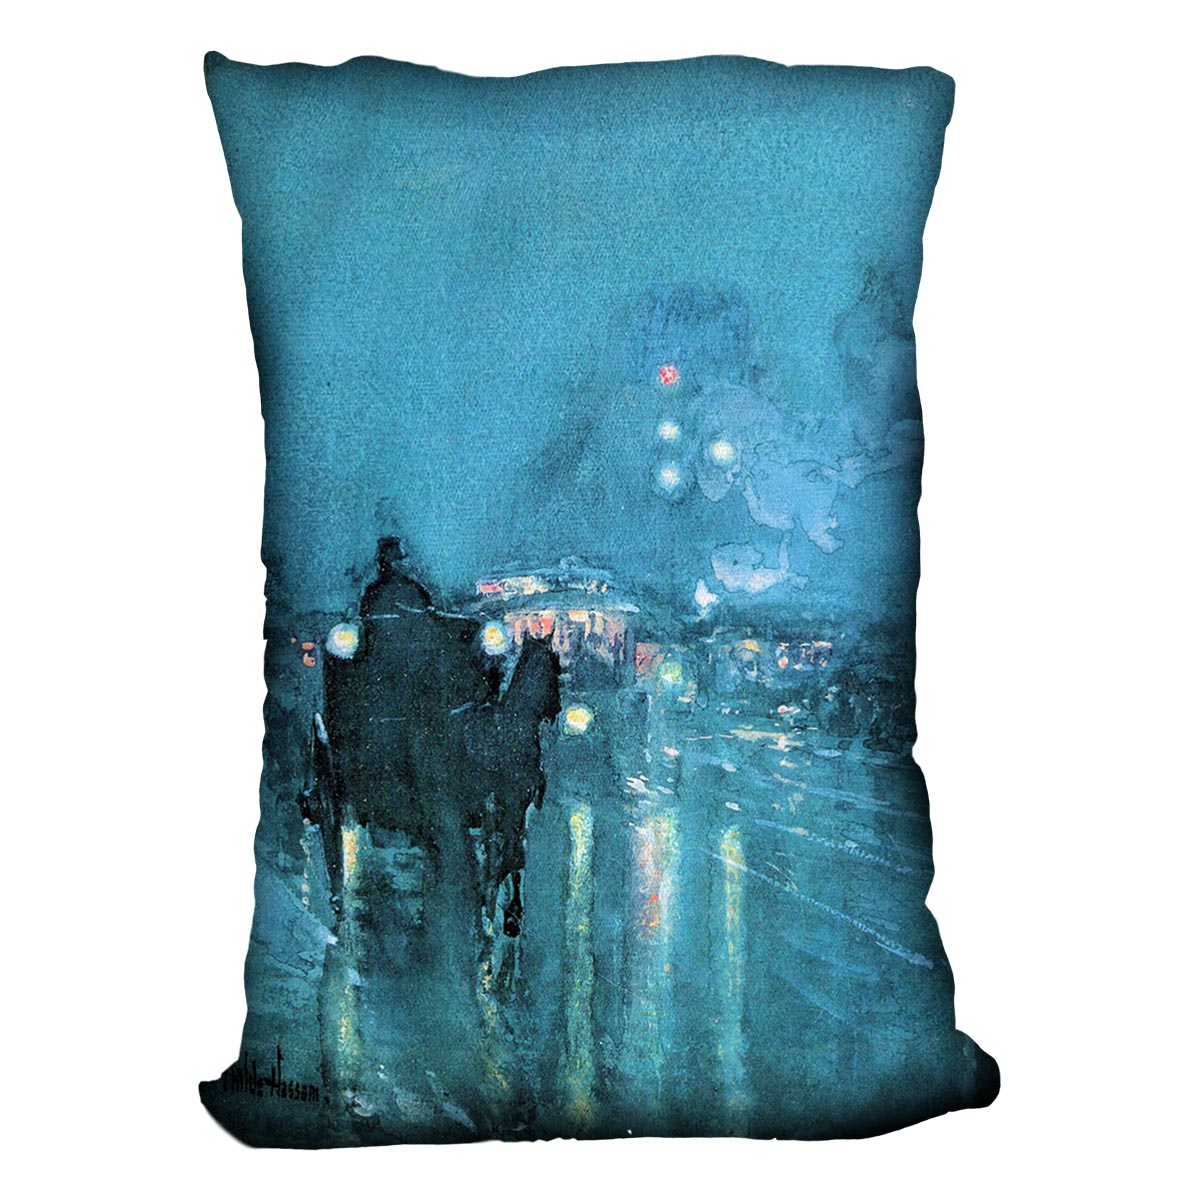 Nocturne Railway Crossing Chicago by Hassam Cushion - Canvas Art Rocks - 4